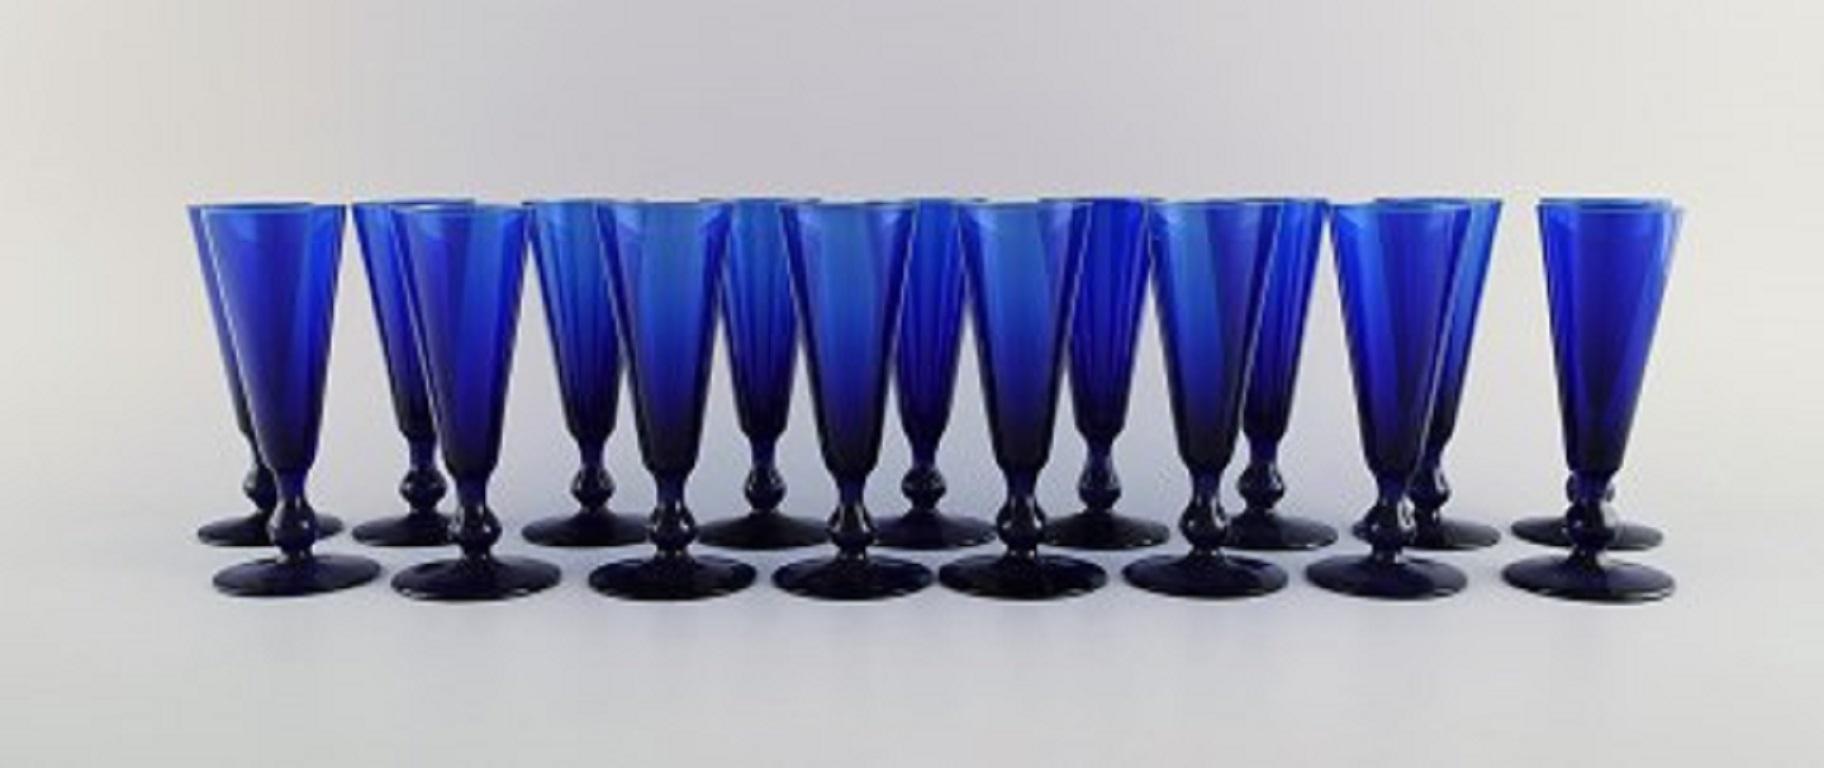 Monica Bratt for Reijmyre. 17 small cocktail glasses in blue mouth-blown art glass. 1950s.
Measures: 12.5 x 5.5 cm.
In excellent condition.